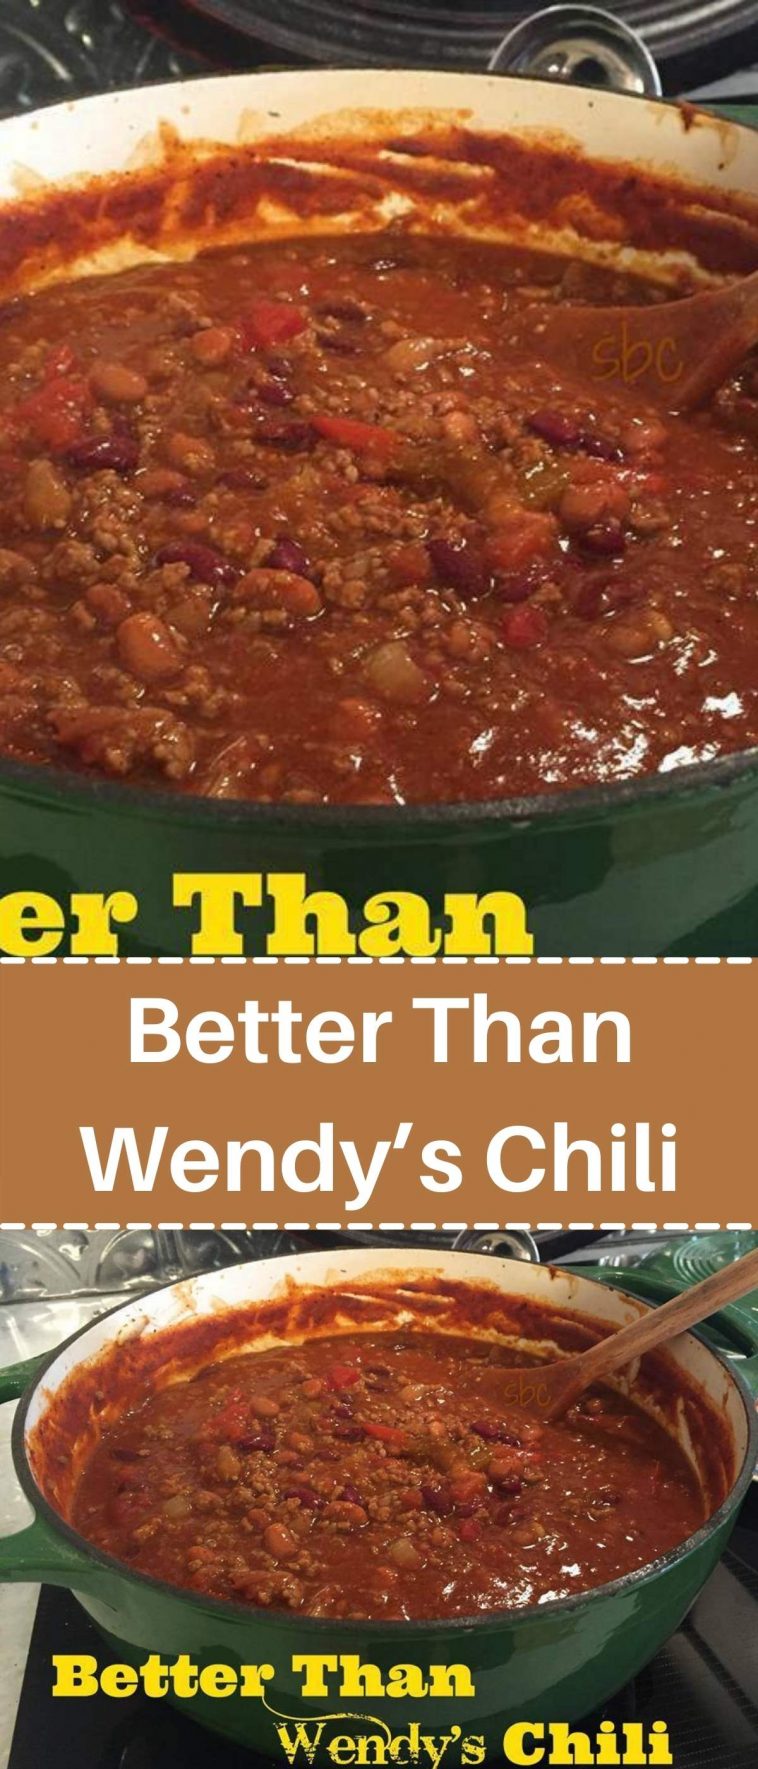 Better Than Wendy’s Chili